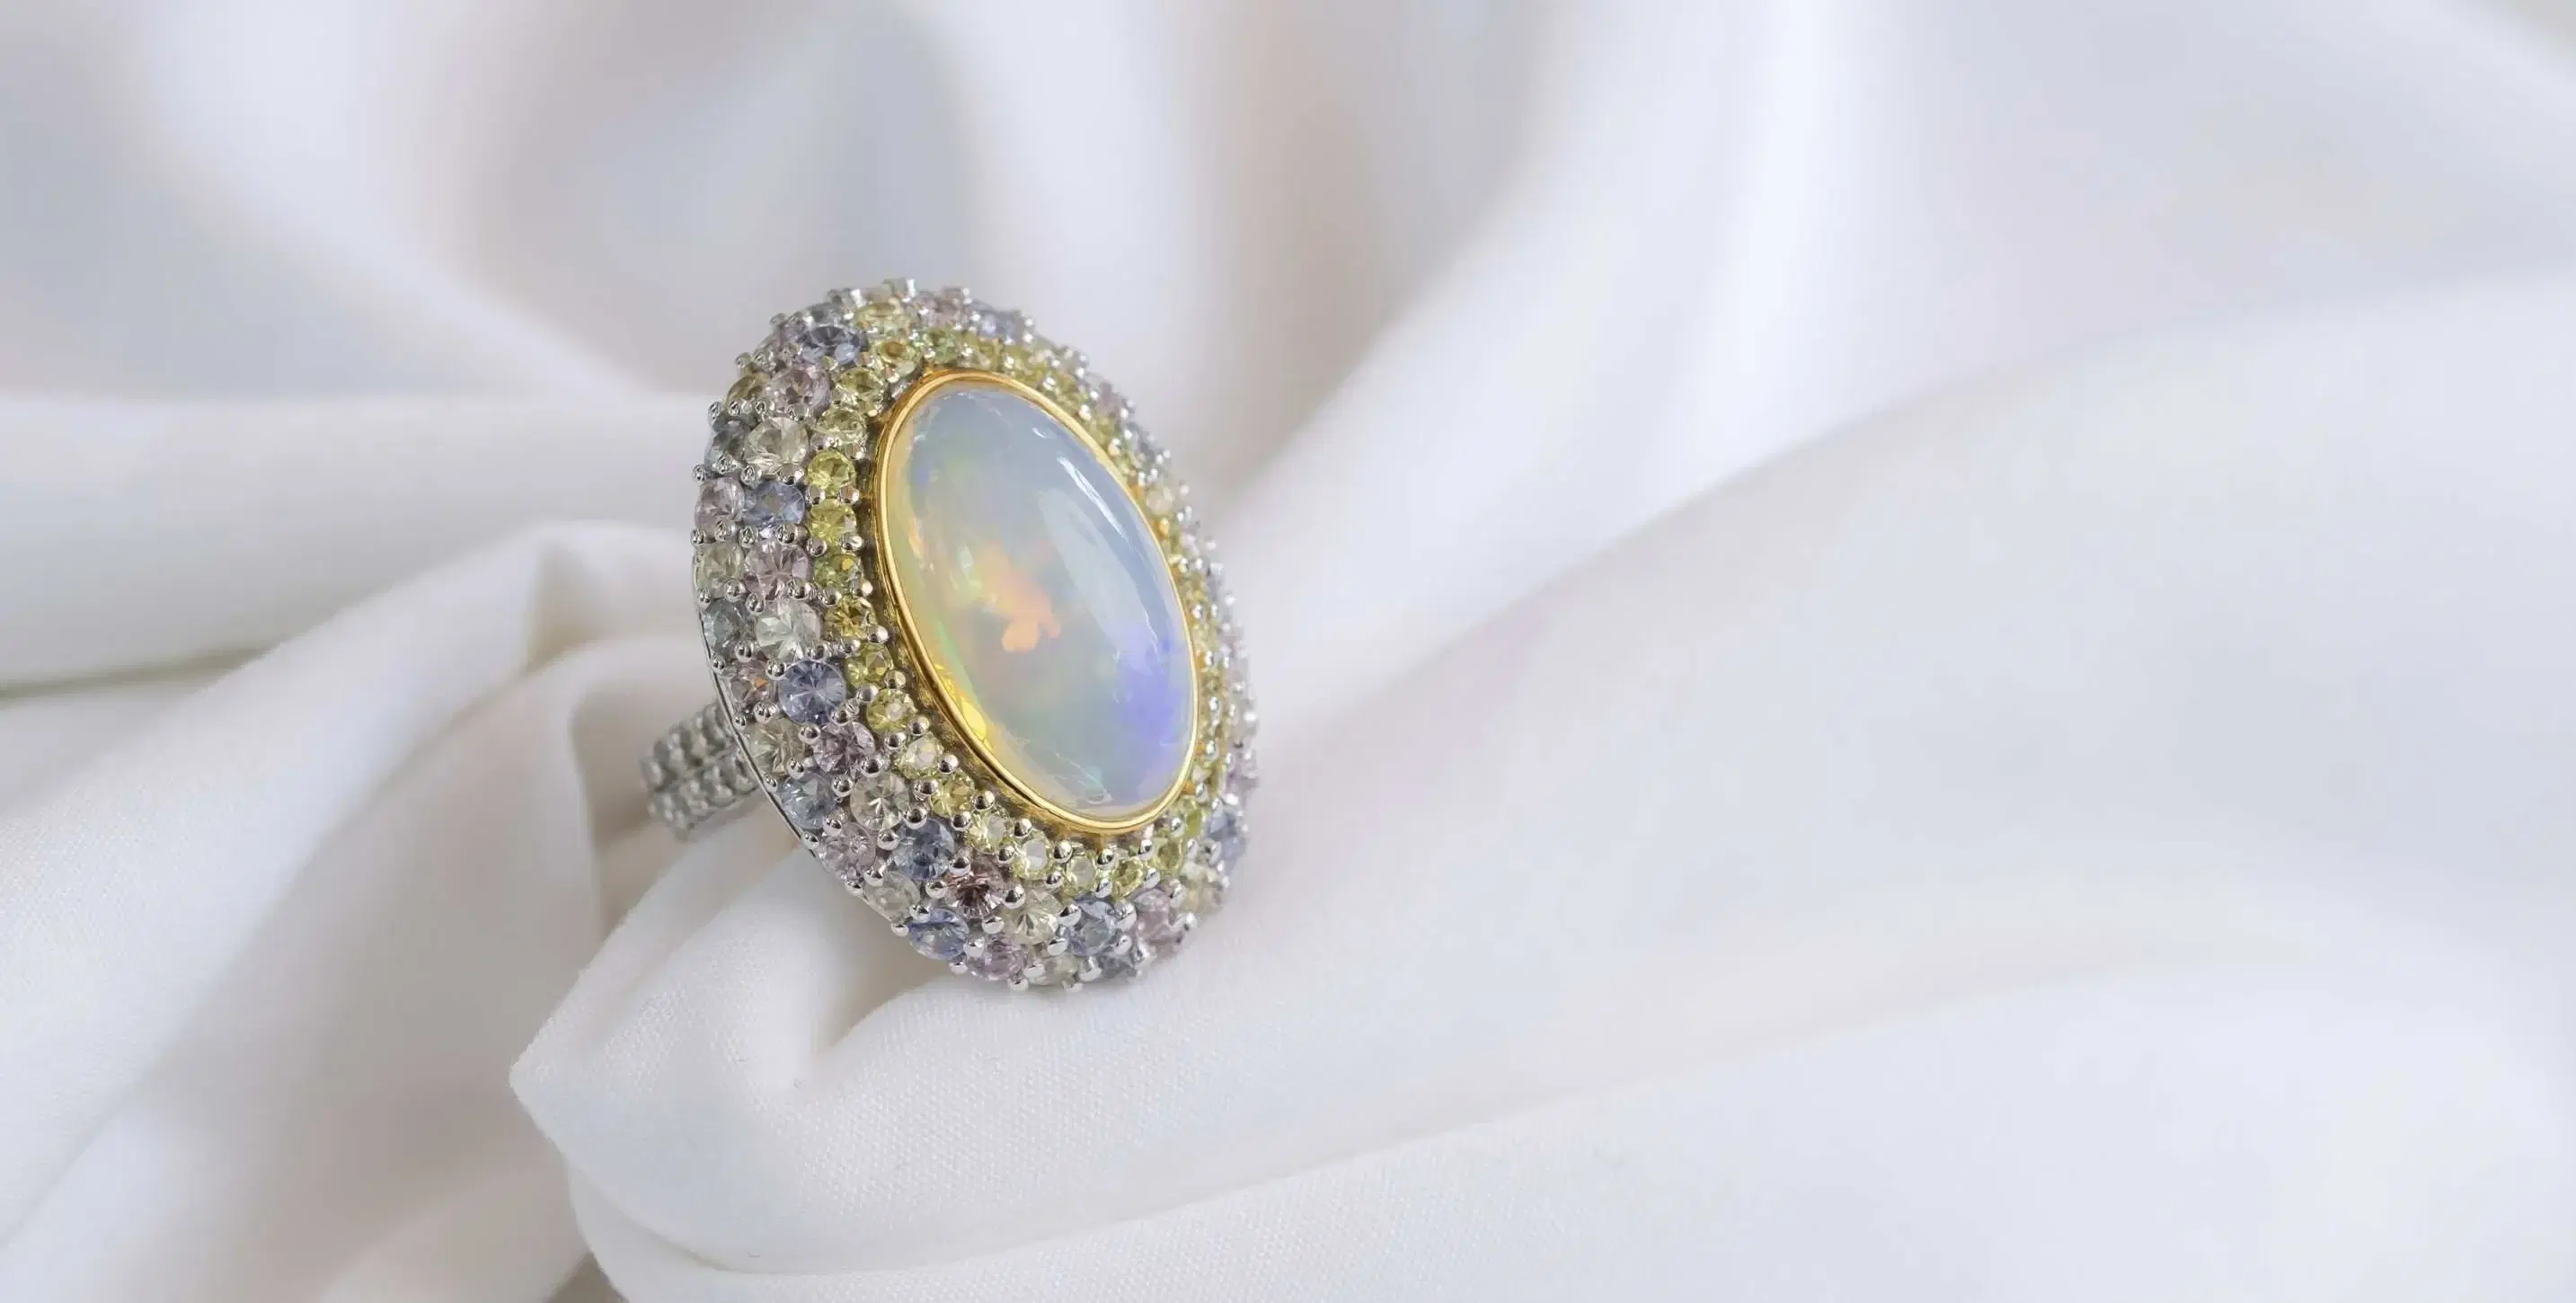 October Birthstone: the Majestic Opal